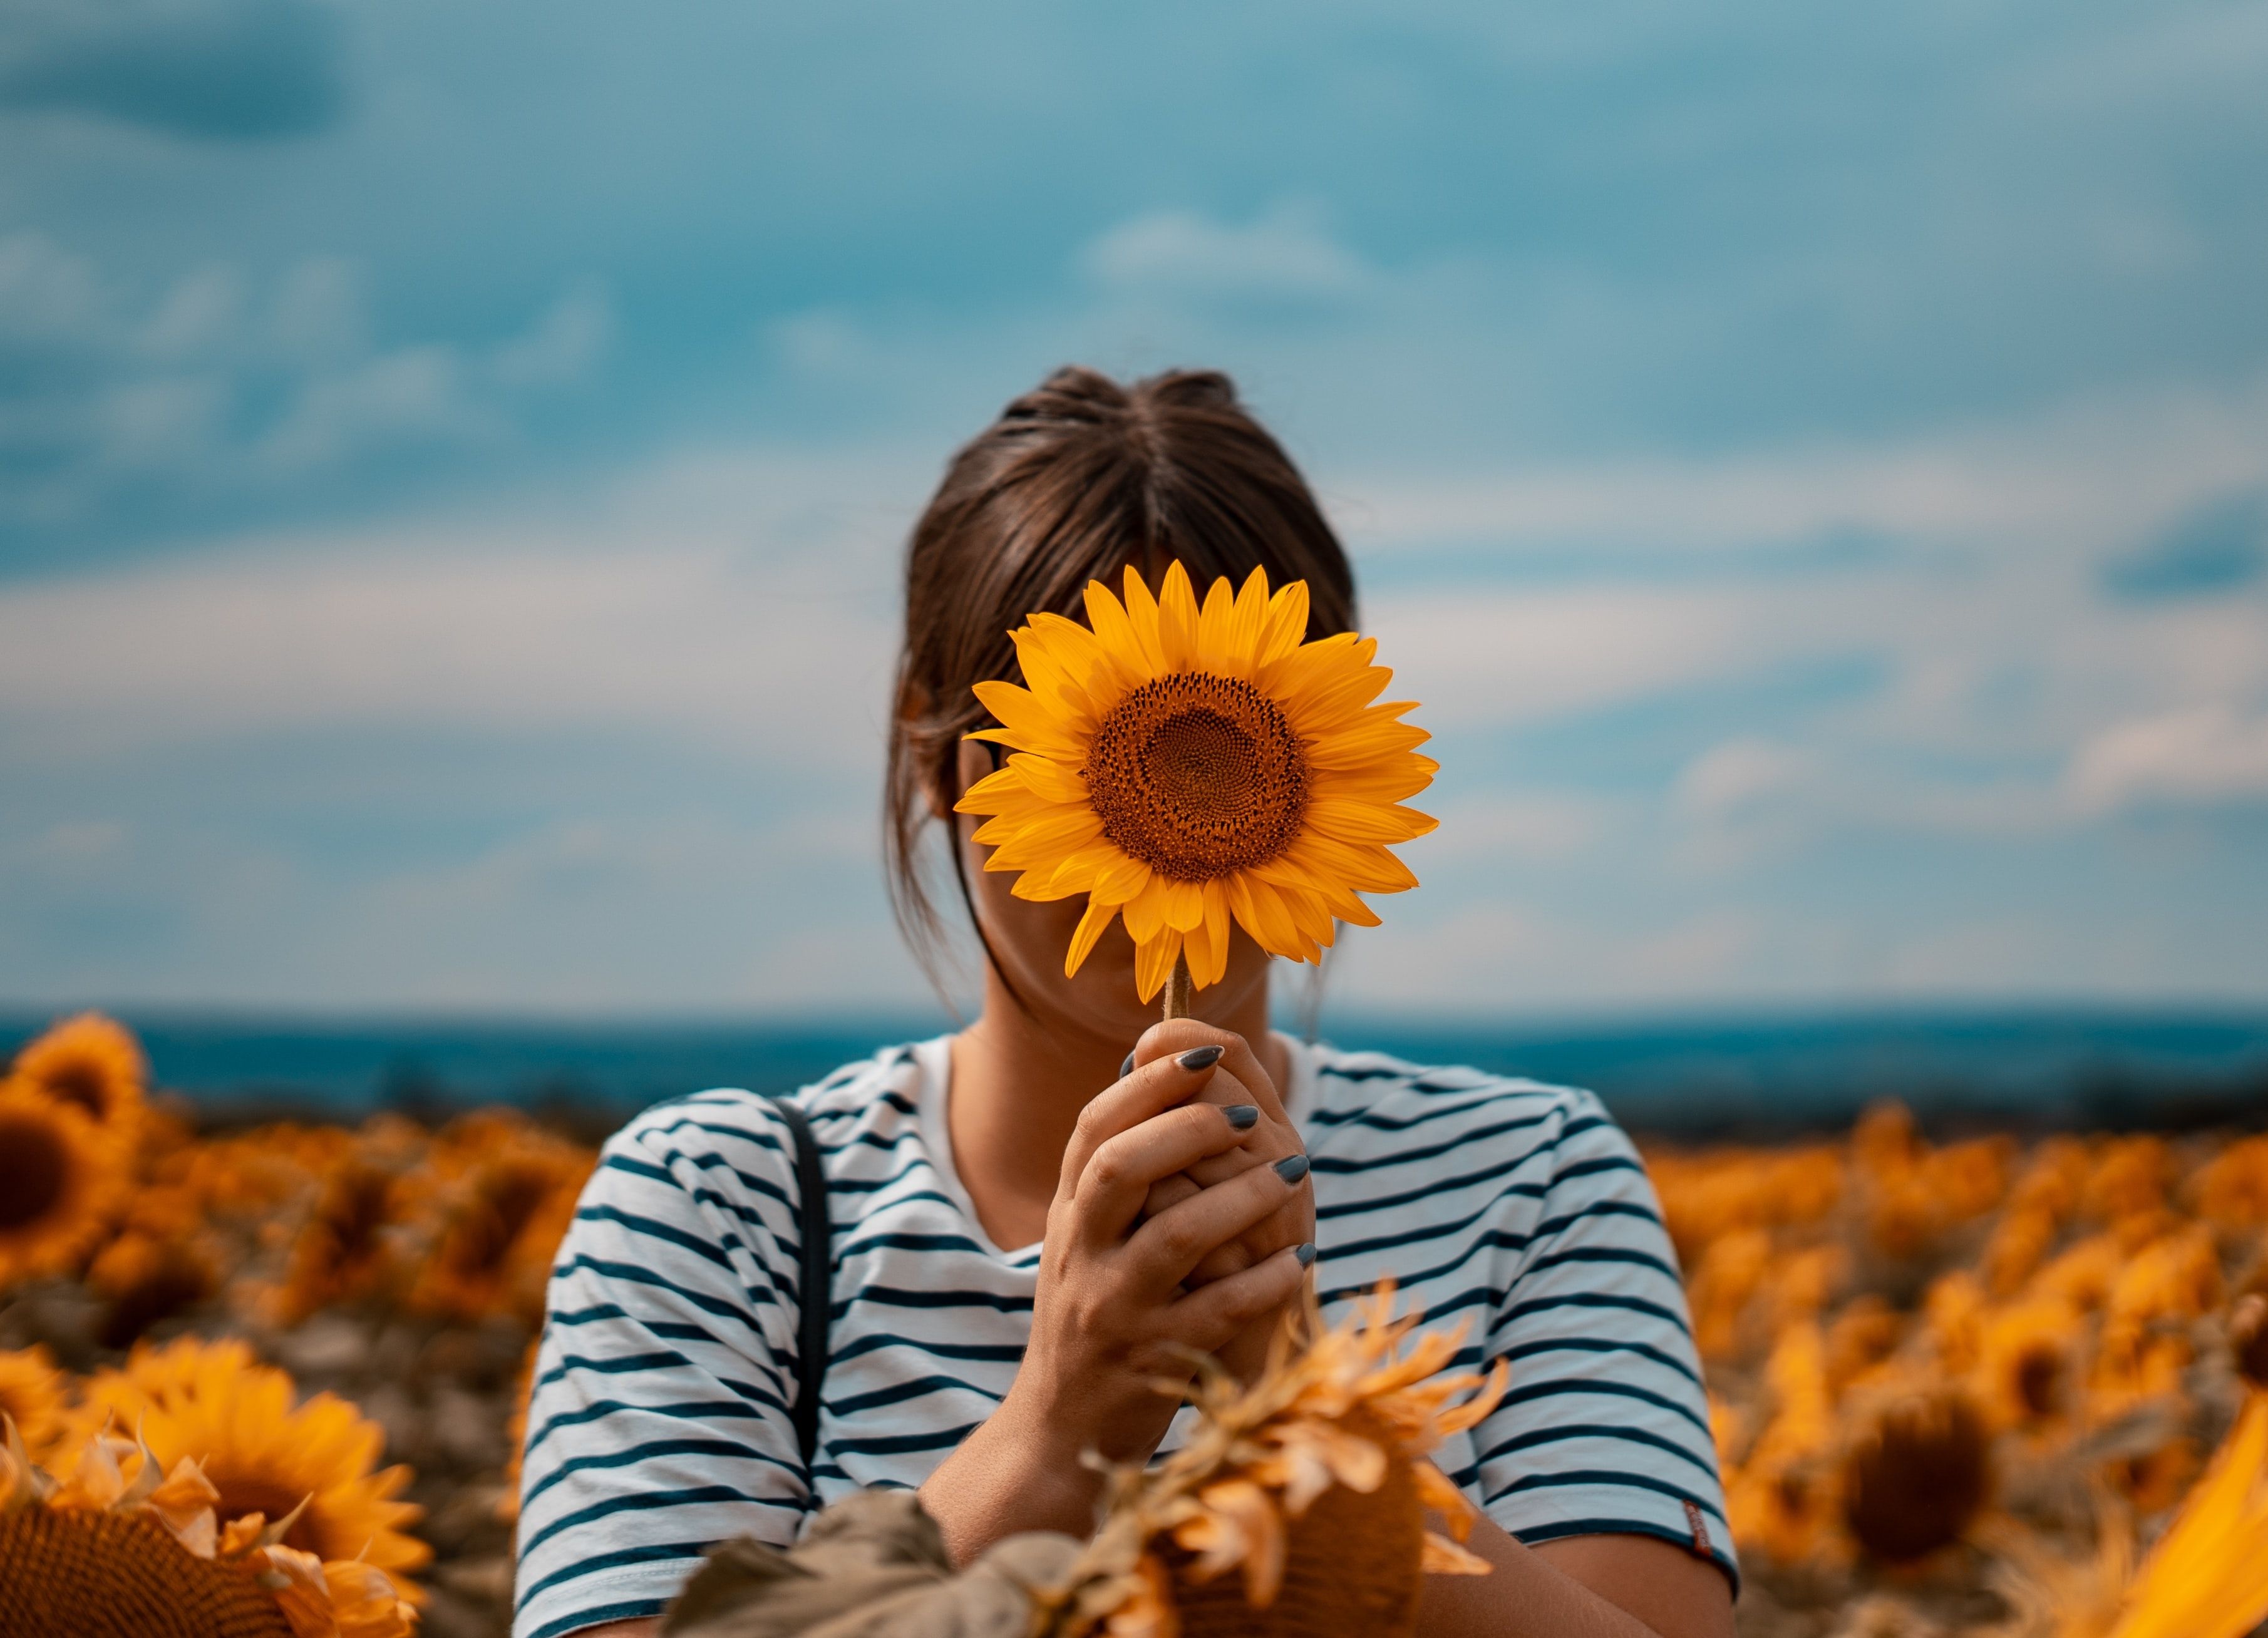 Aesthetic girly image wallpaper with sunflower Wallpaper Download